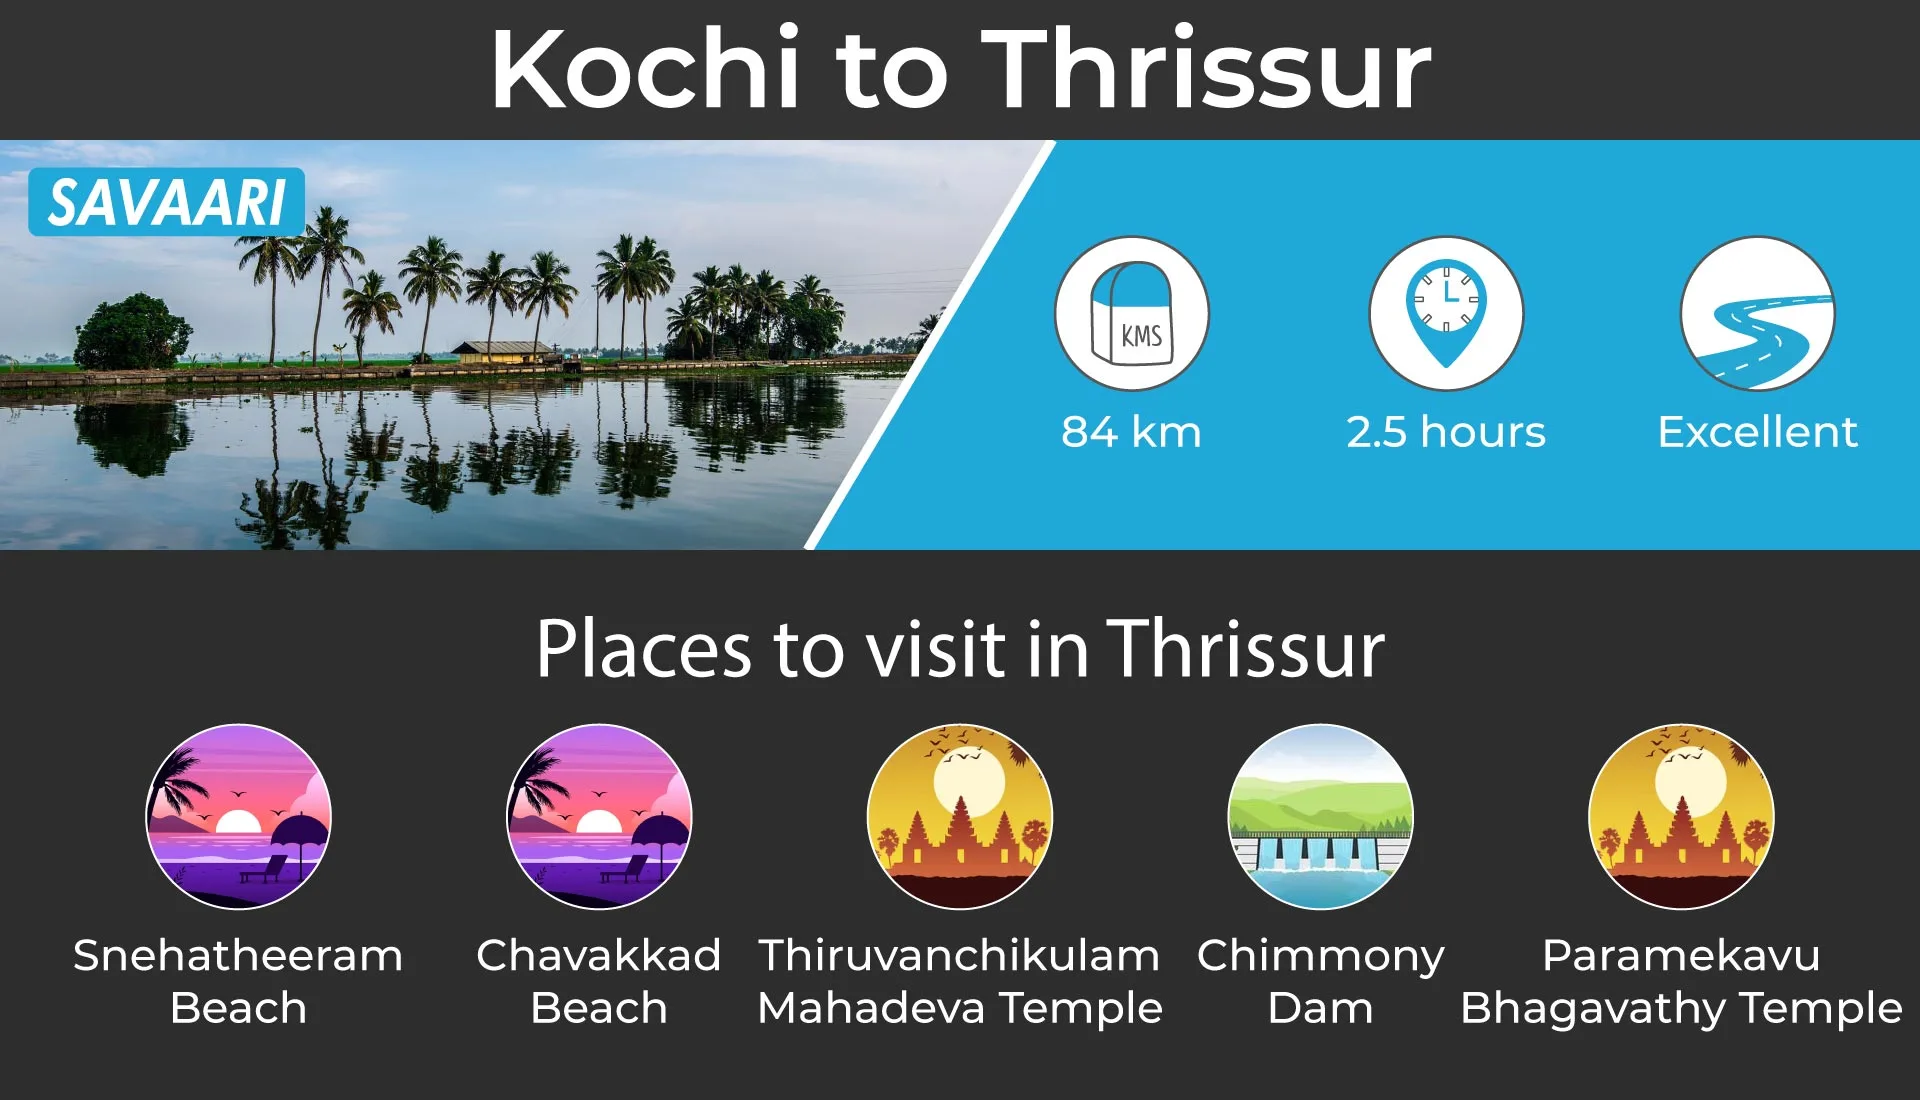 Kochi to Thrissur by road